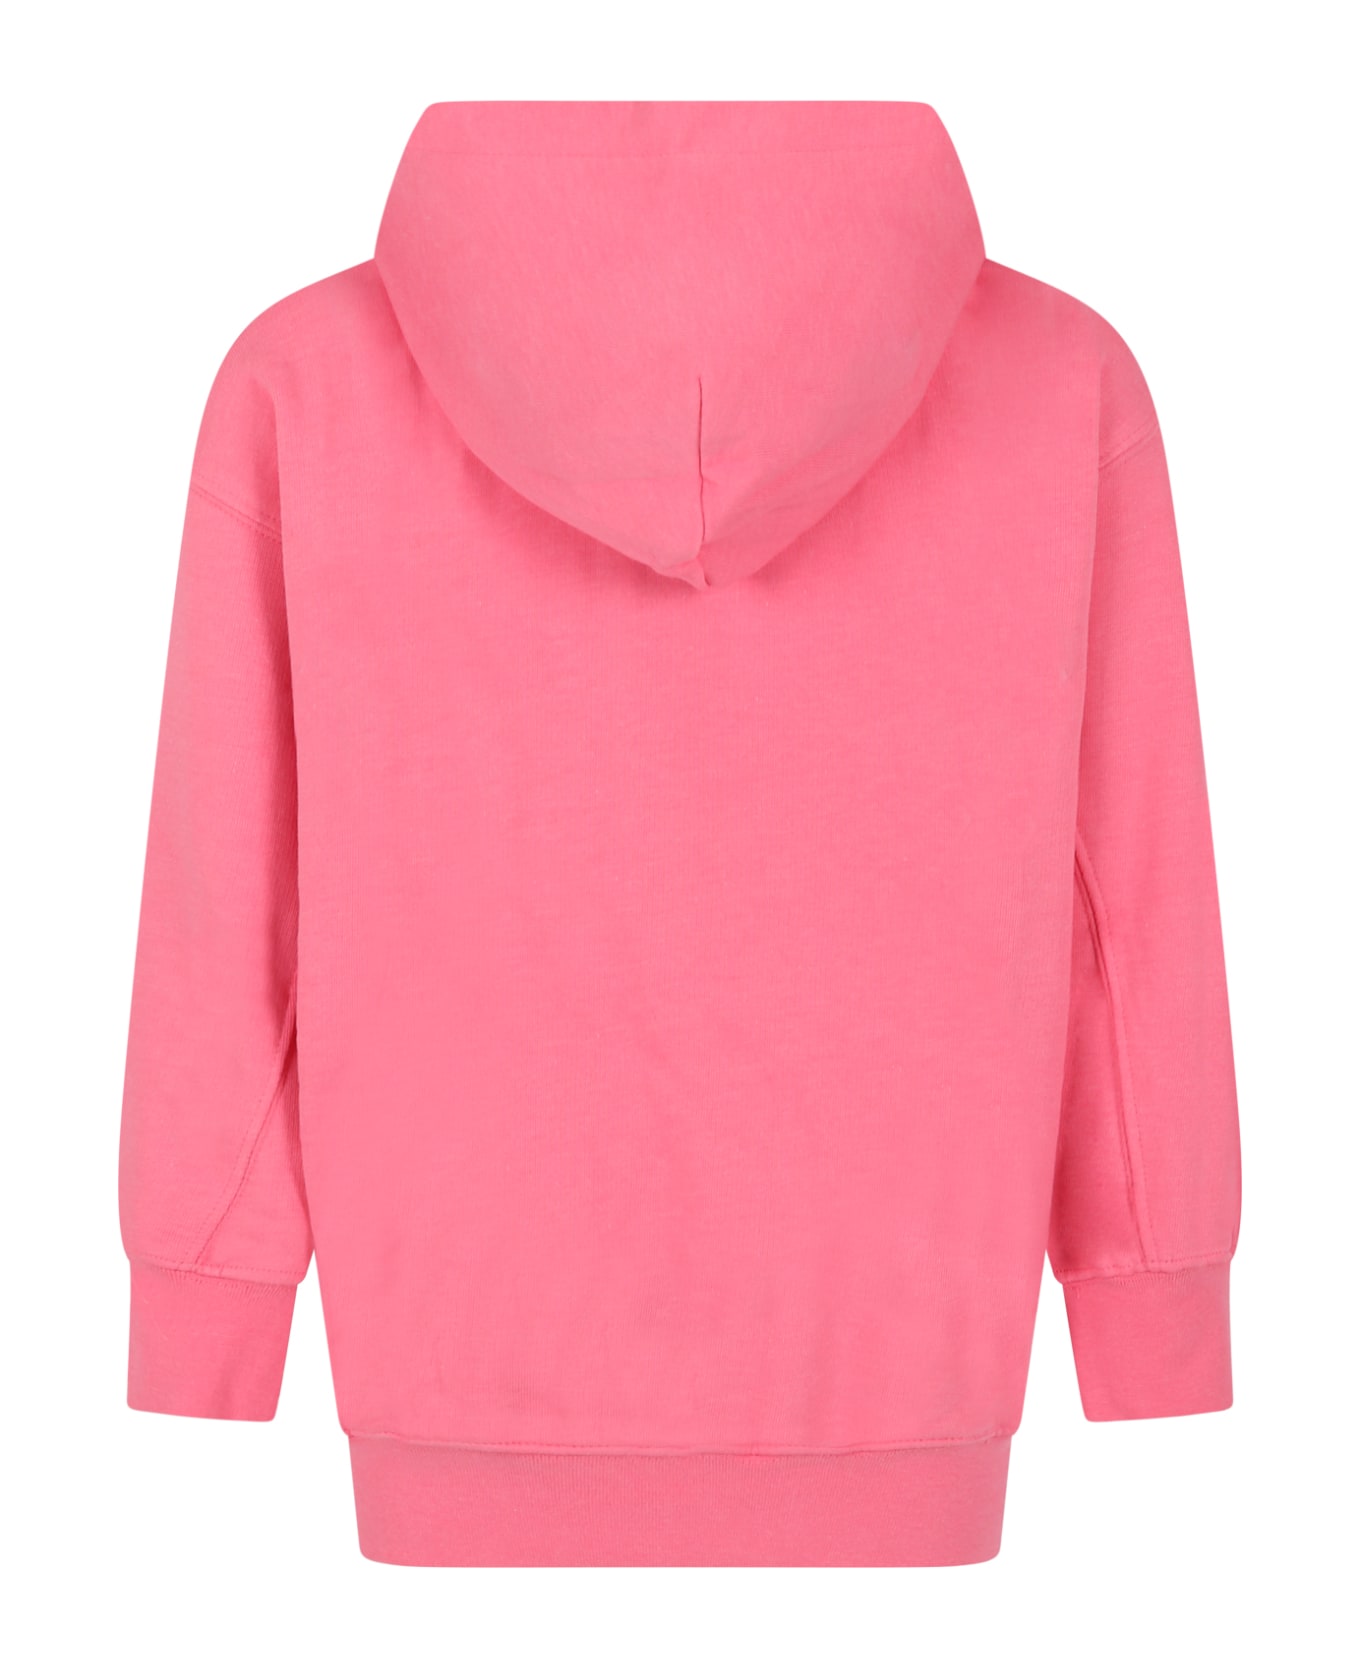 Molo Pink Sweatshirt For Girl With "peace Now" Writing - Pink